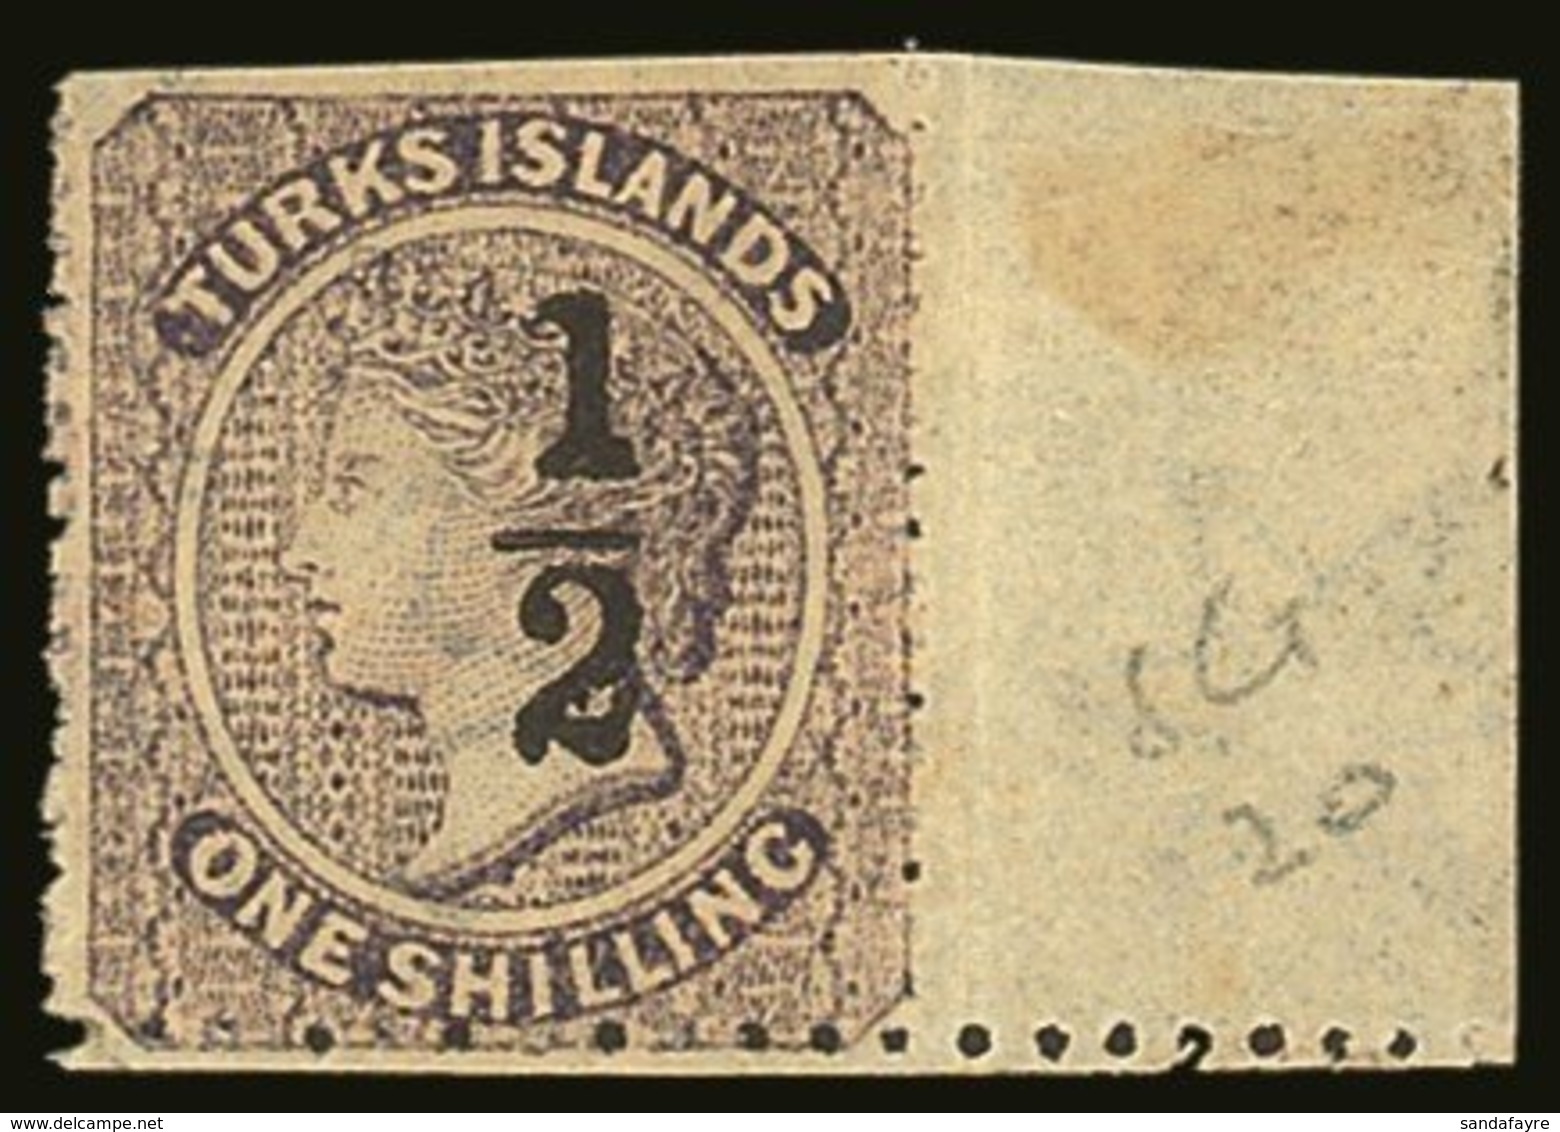 1881 "½" On 1s Lilac, Setting 10, Type 10, SG 20 Fine Marginal Mint (scissor Trimmed At Top). BPA Cert. For More Images, - Turks And Caicos